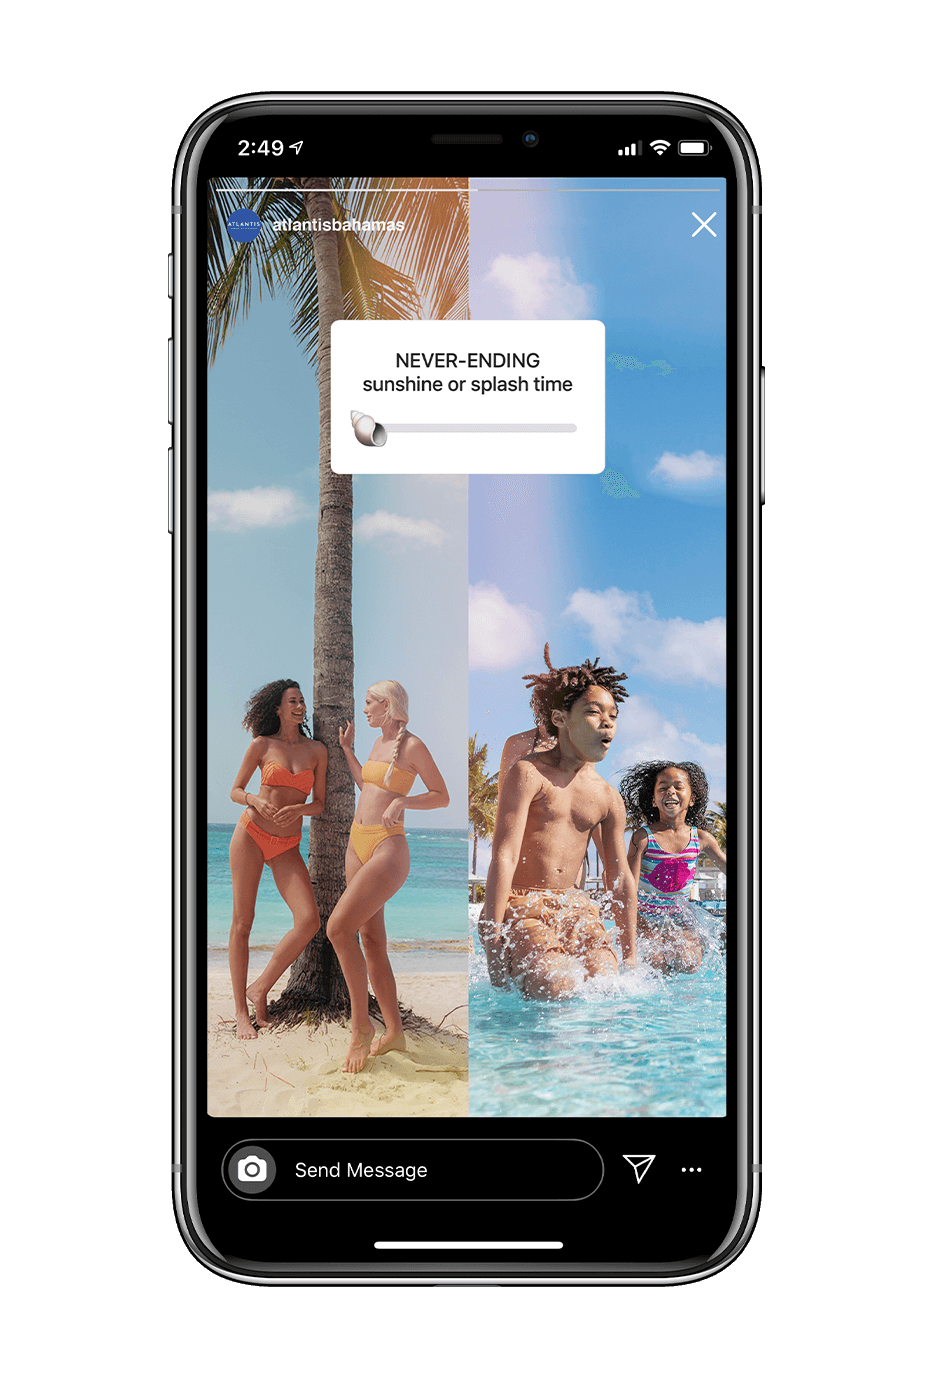 Mockup of iphone showing an example of an Atlantis Bahamas interactive instagram story. The slider sticker reads 